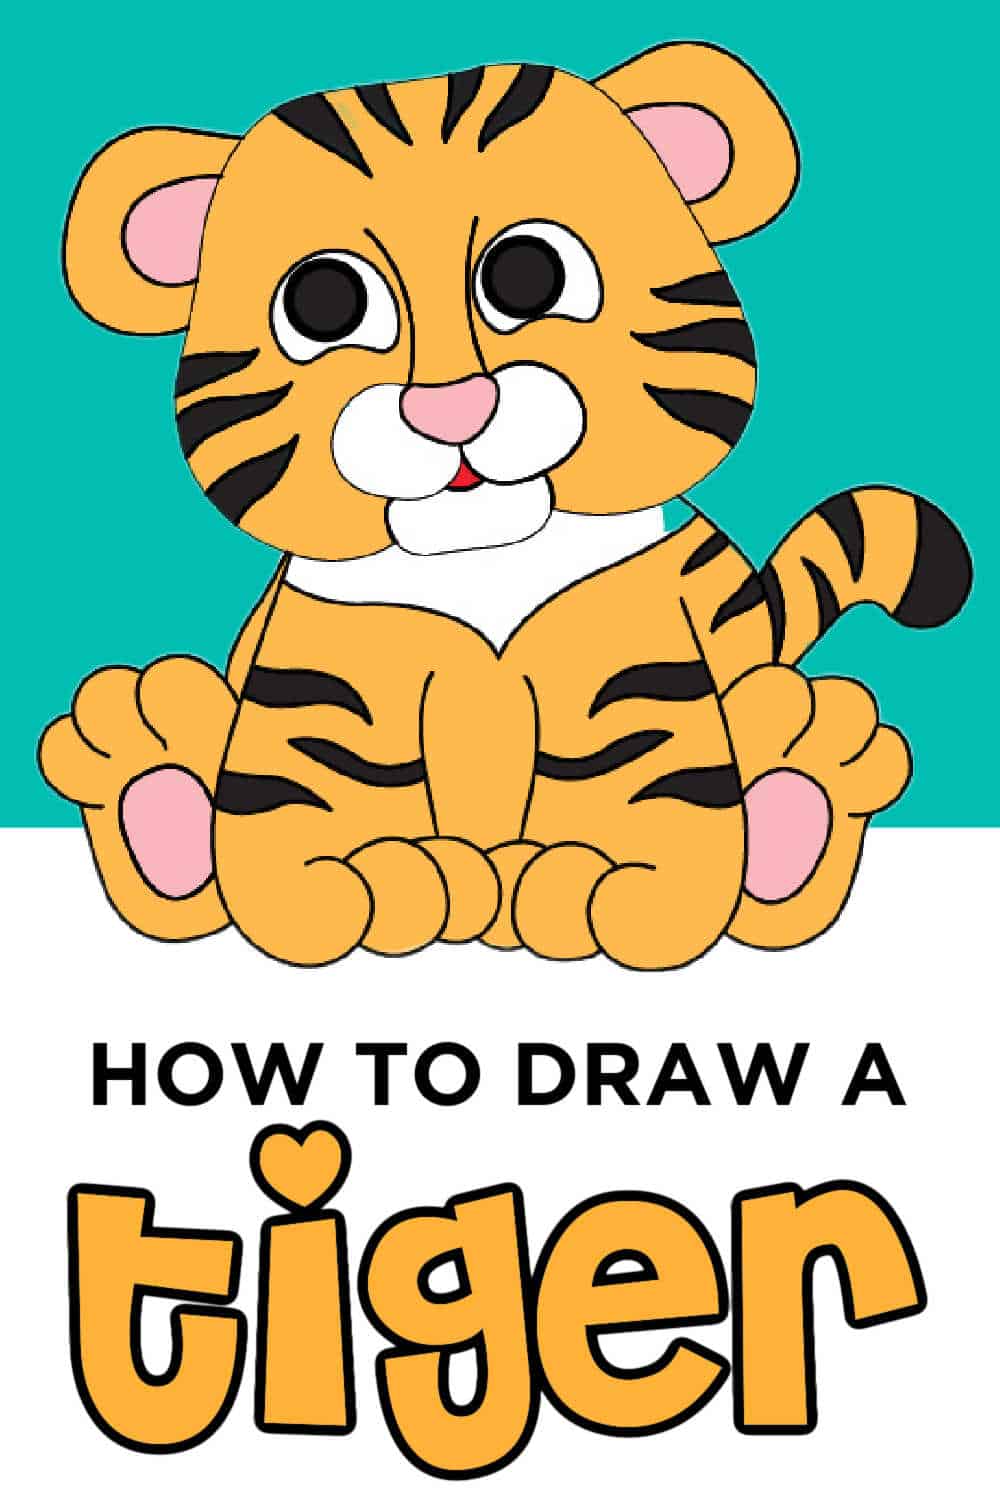 How to Draw an Elephant Cute and Easy || Easy animals to draw-saigonsouth.com.vn